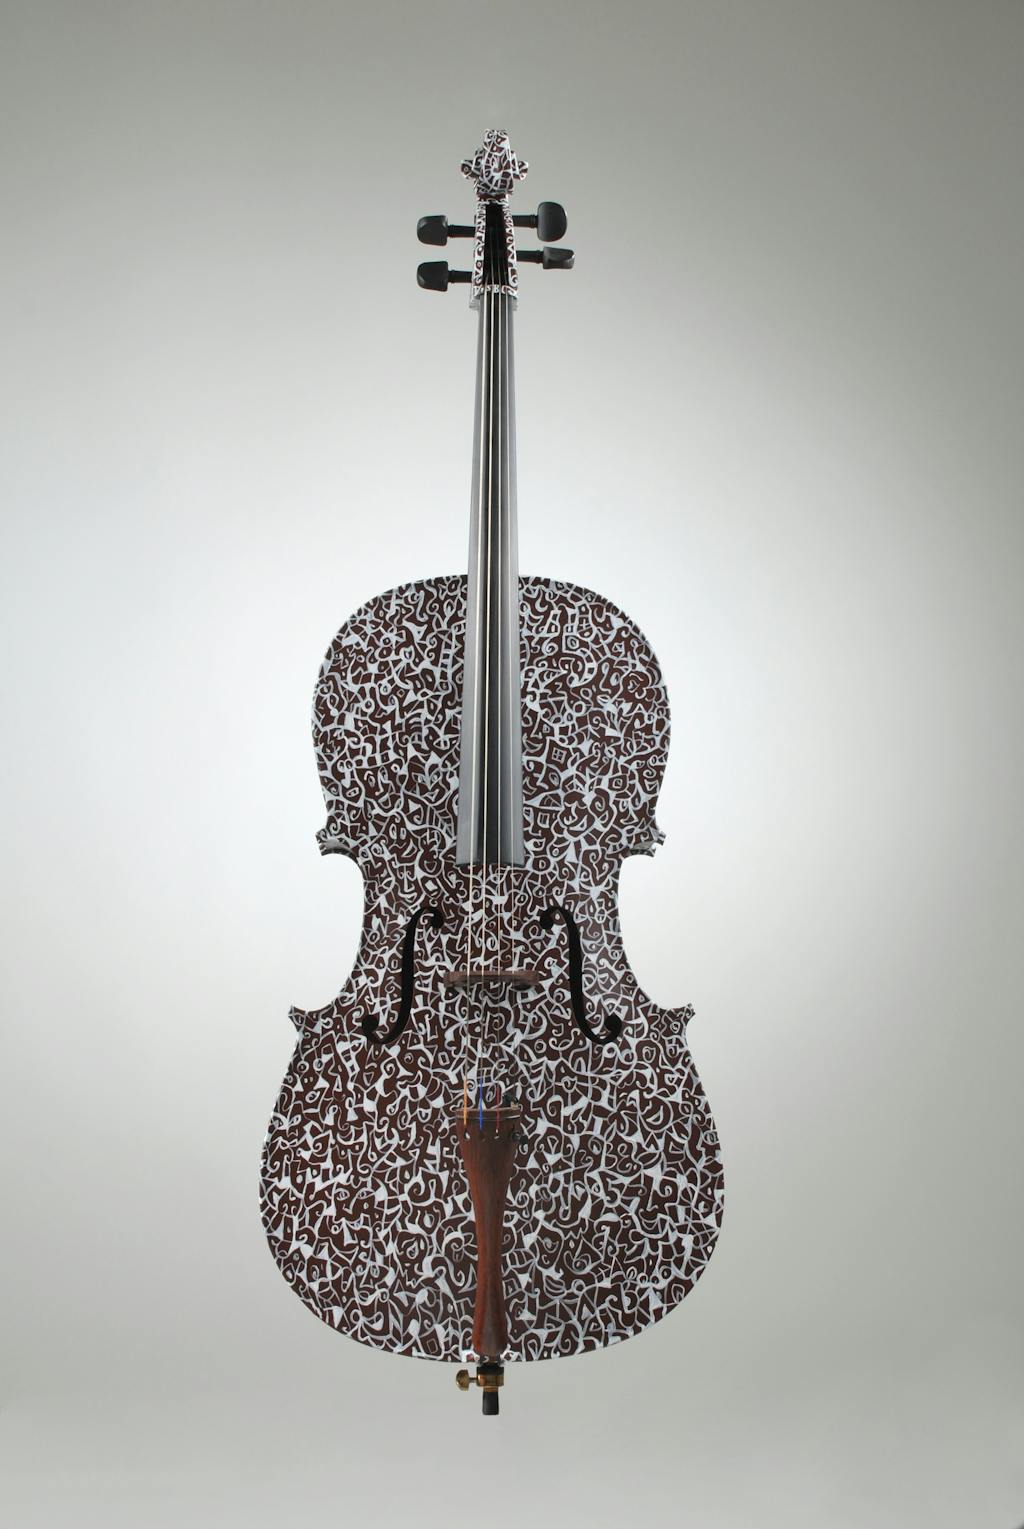 Cello "Boléro", painted by Elena Birkenwald in 2000